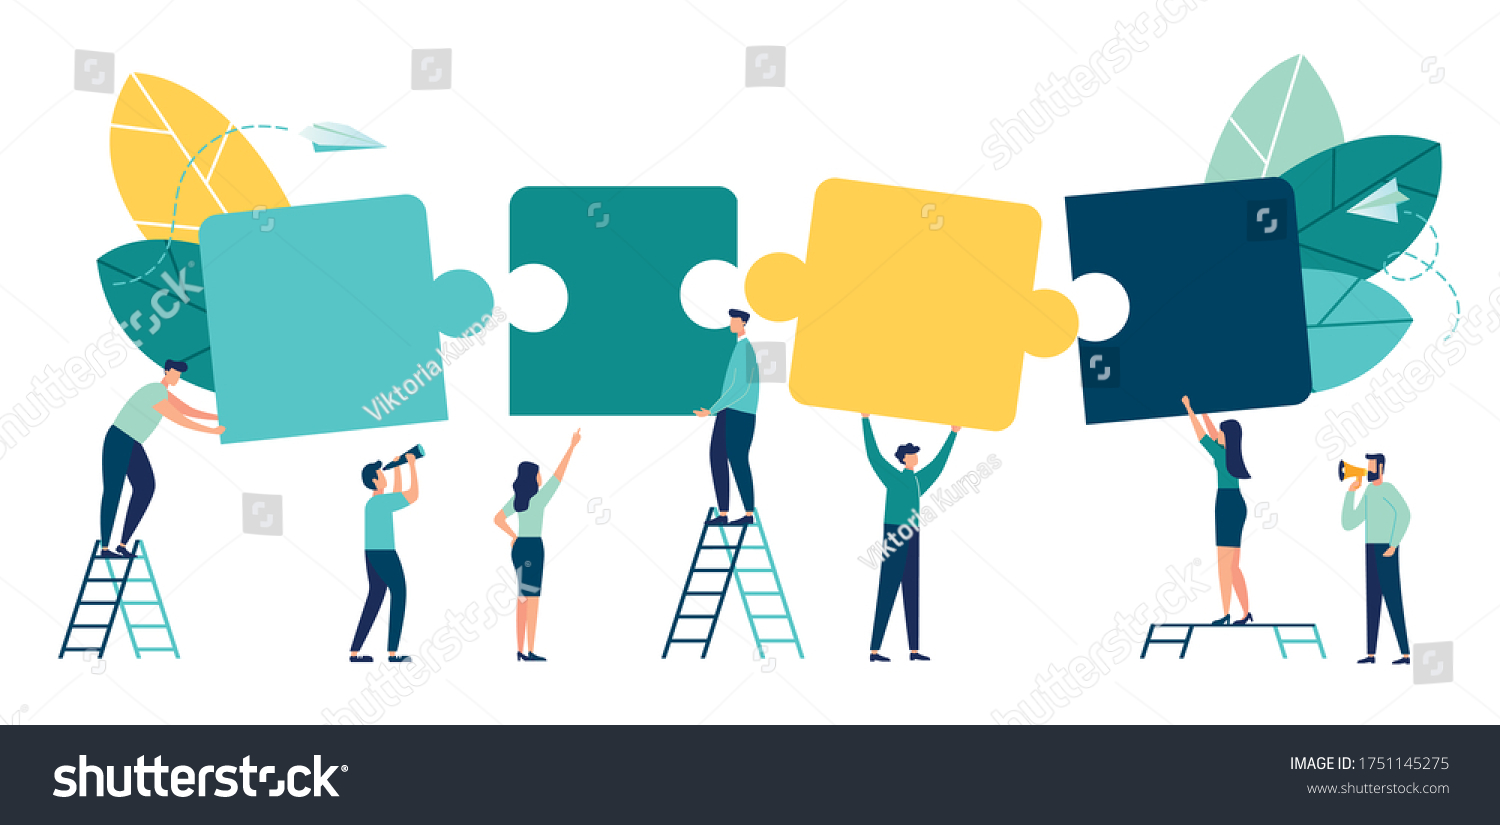 Business concept. Team metaphor. people connecting puzzle elements. Vector illustration flat design style. Symbol of teamwork, cooperation, partnership vector #1751145275